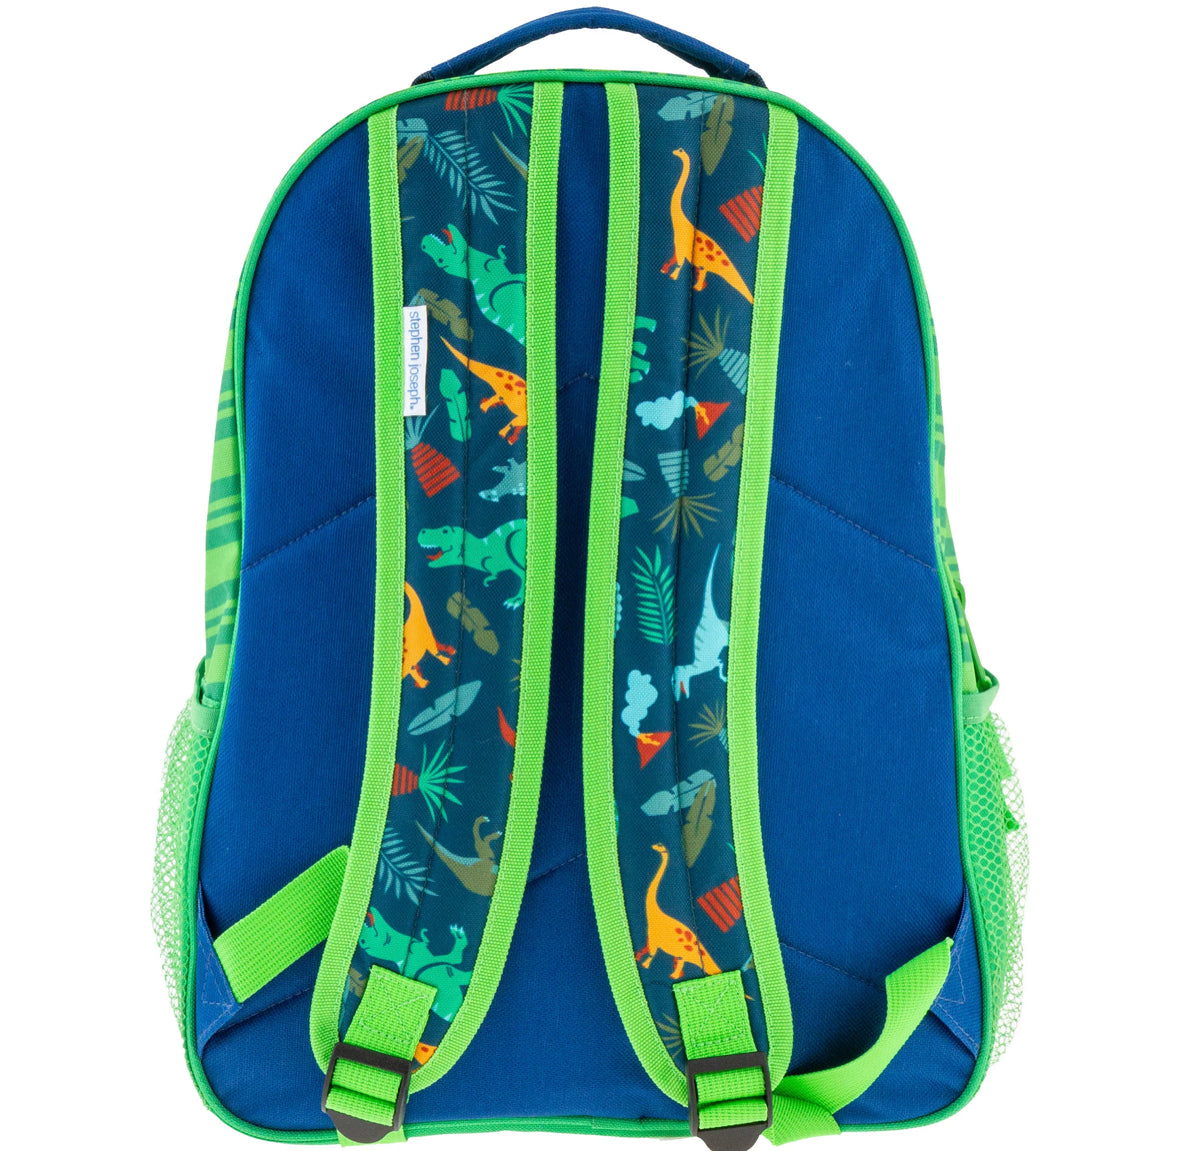 Backpack - Green Dinosaur     - Chickie Collective